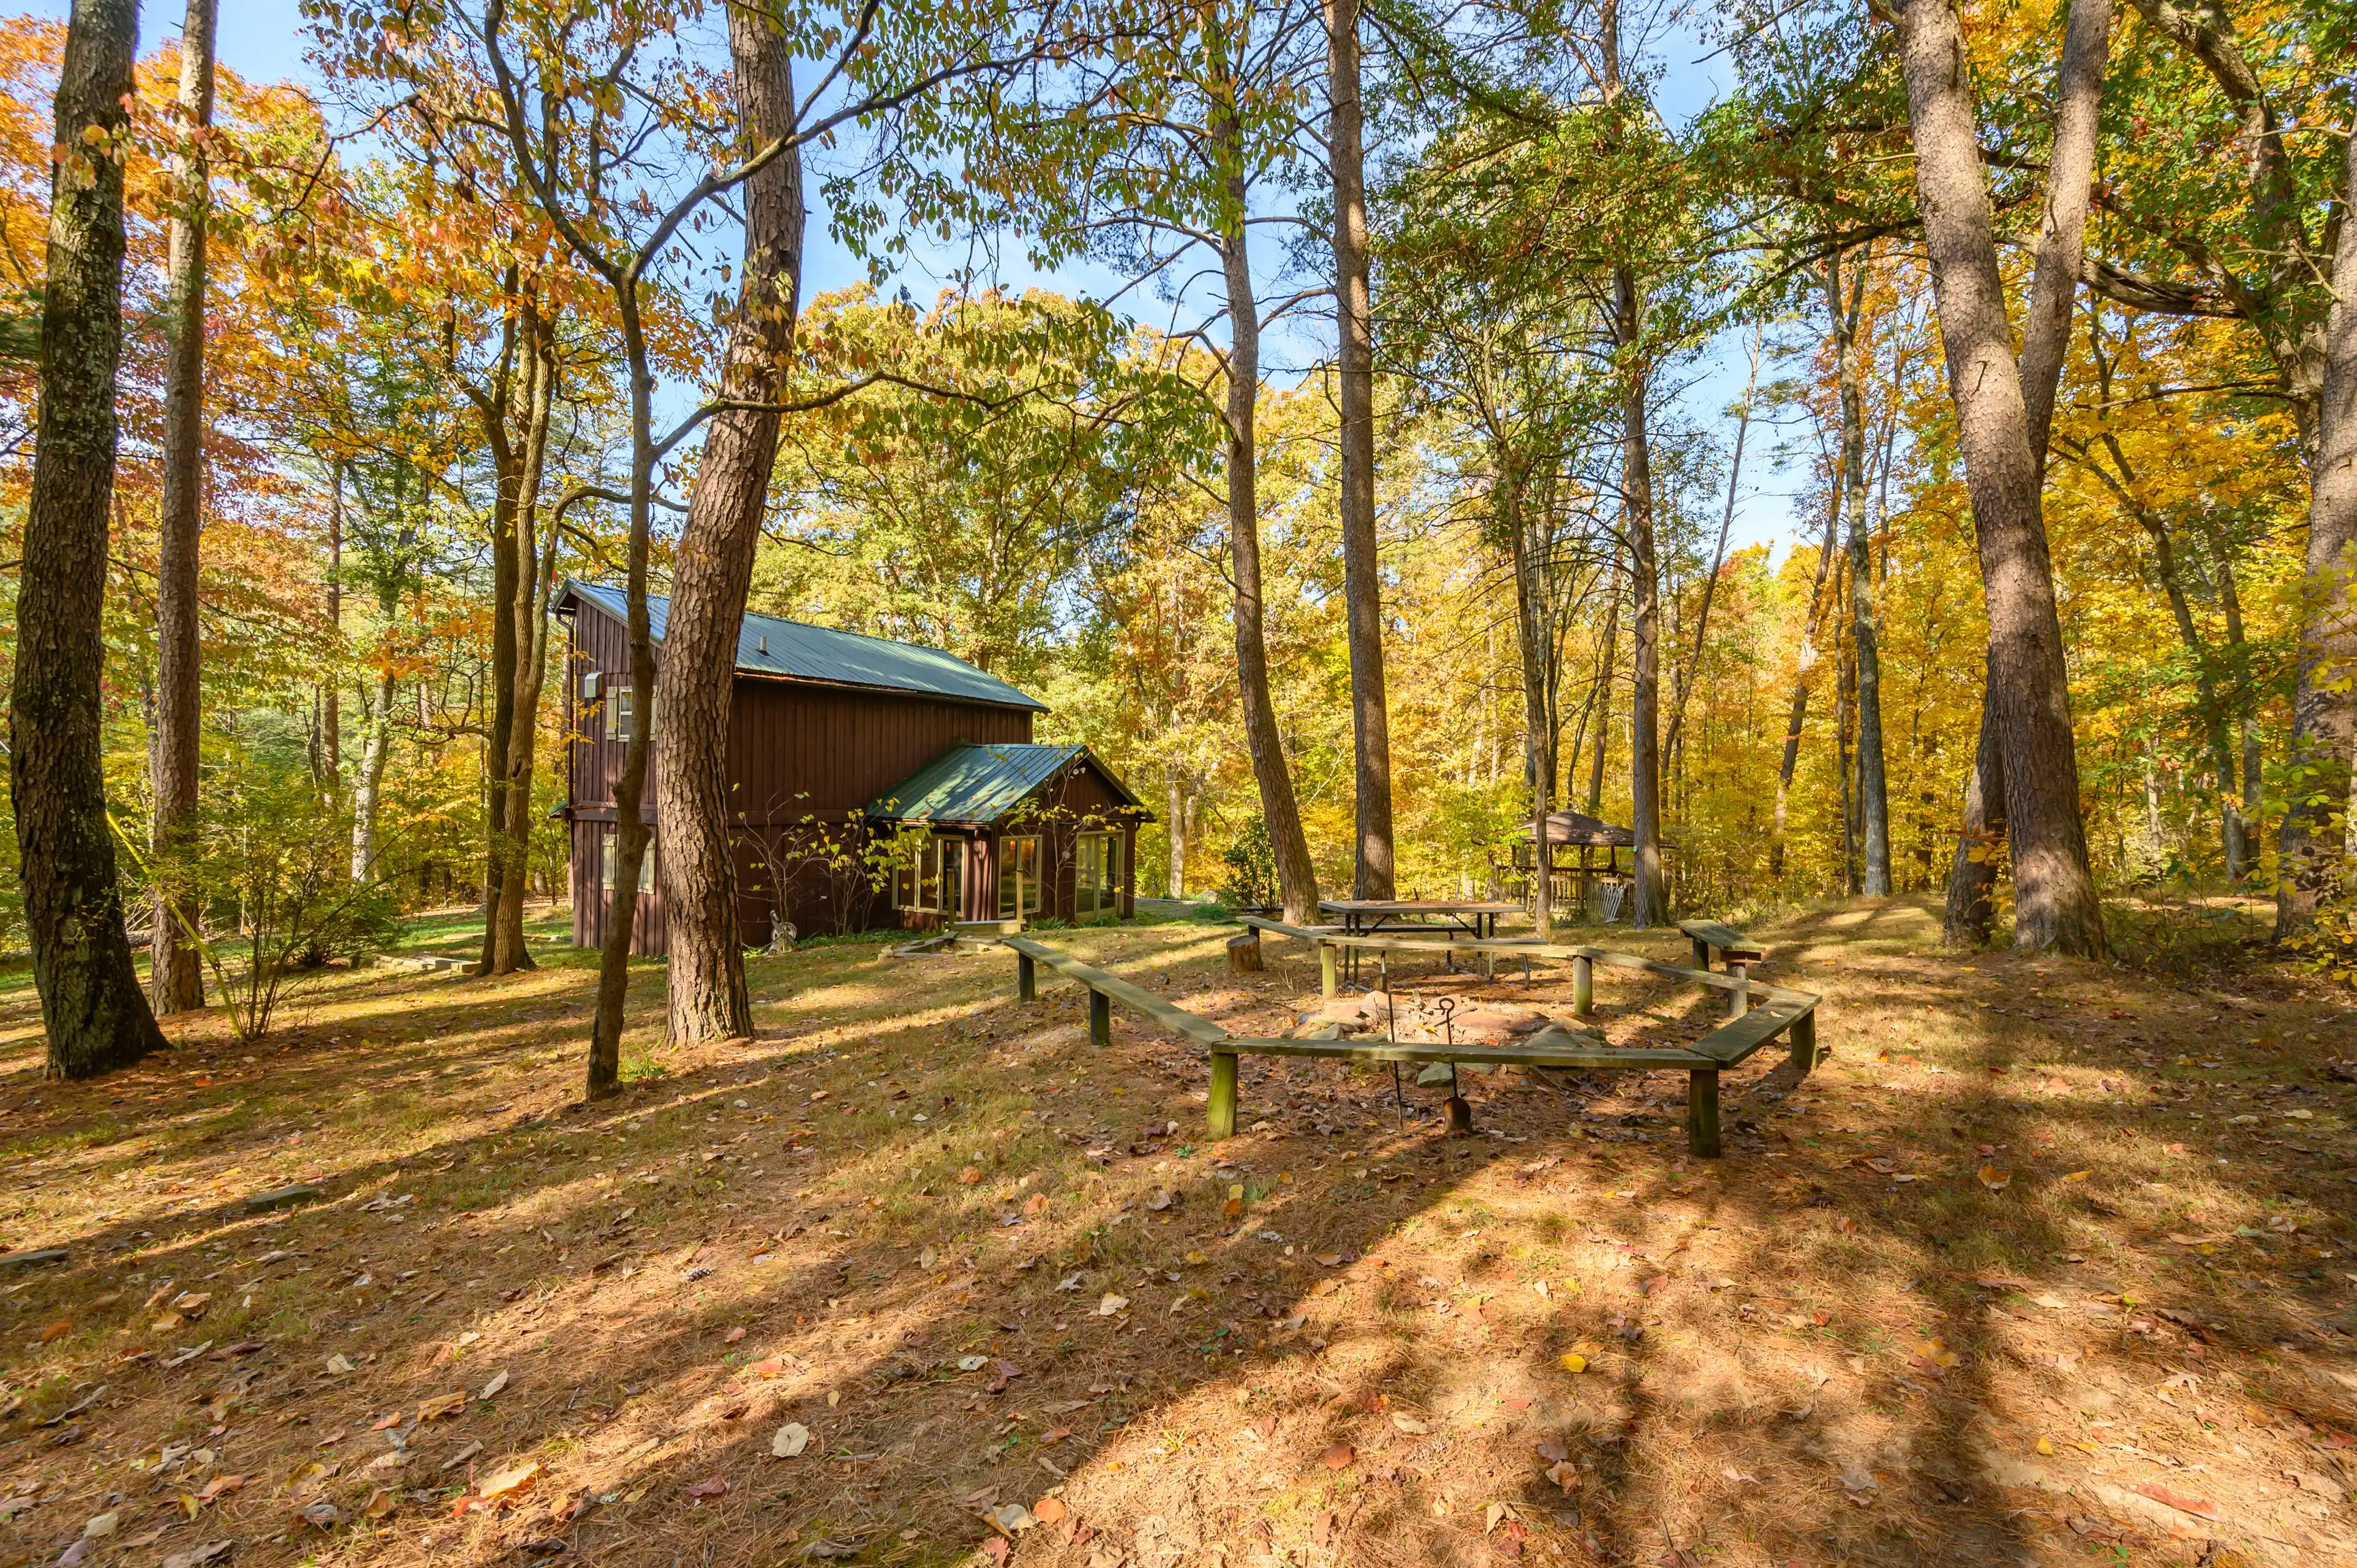 A peaceful woodland setting with a rustic cabin surrounded by tall trees with autumn foliage and a wooden picnic table in the foreground.